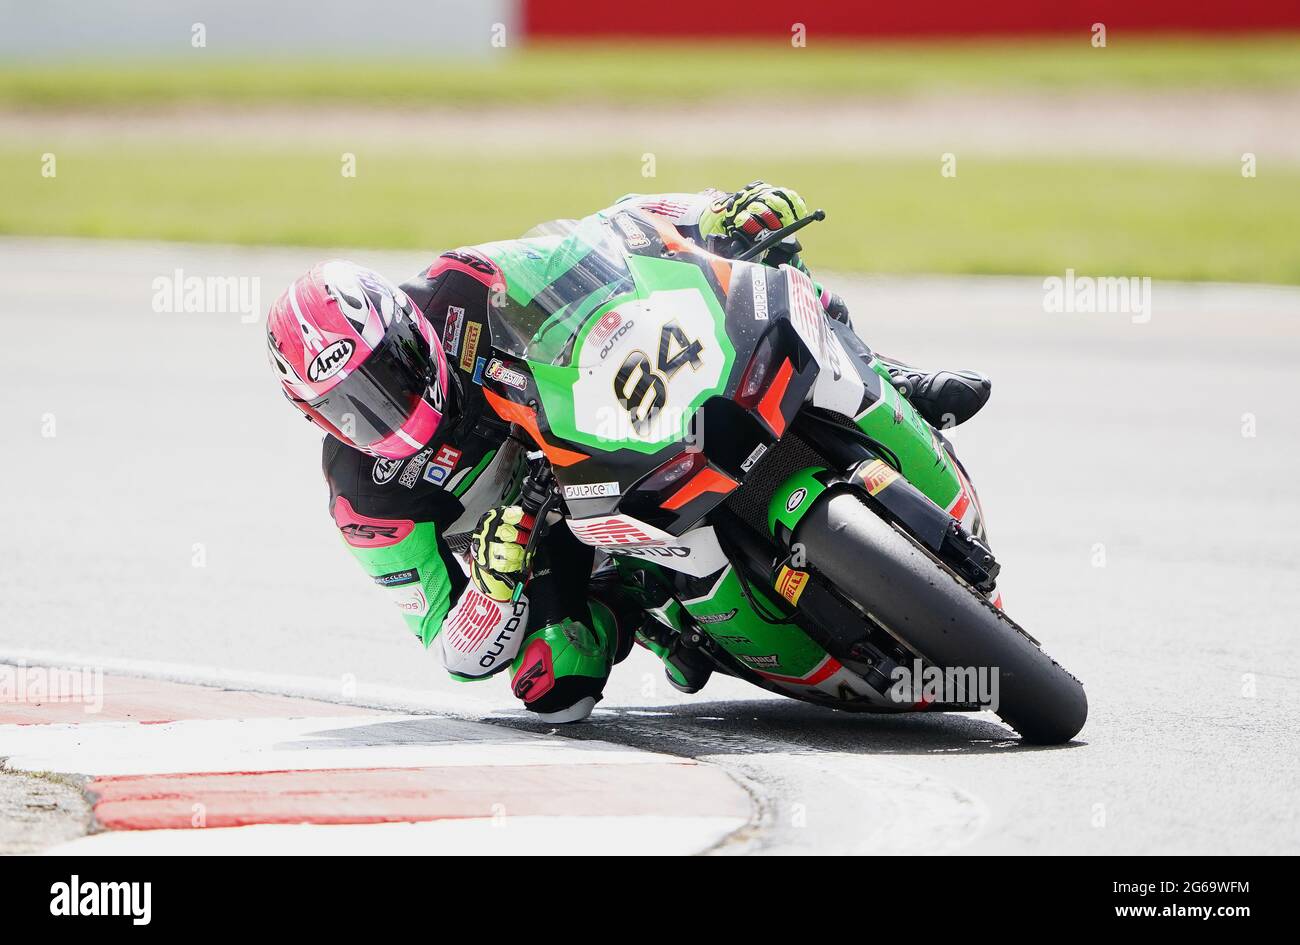 Loris Cresson of OUTDO TPR Team Pedercini Racing during Race 2 during day two of the Motul Fim Superbike Championship 2021 at Donington Park, Leicestershire. Saturday July 4, 2021. Stock Photo